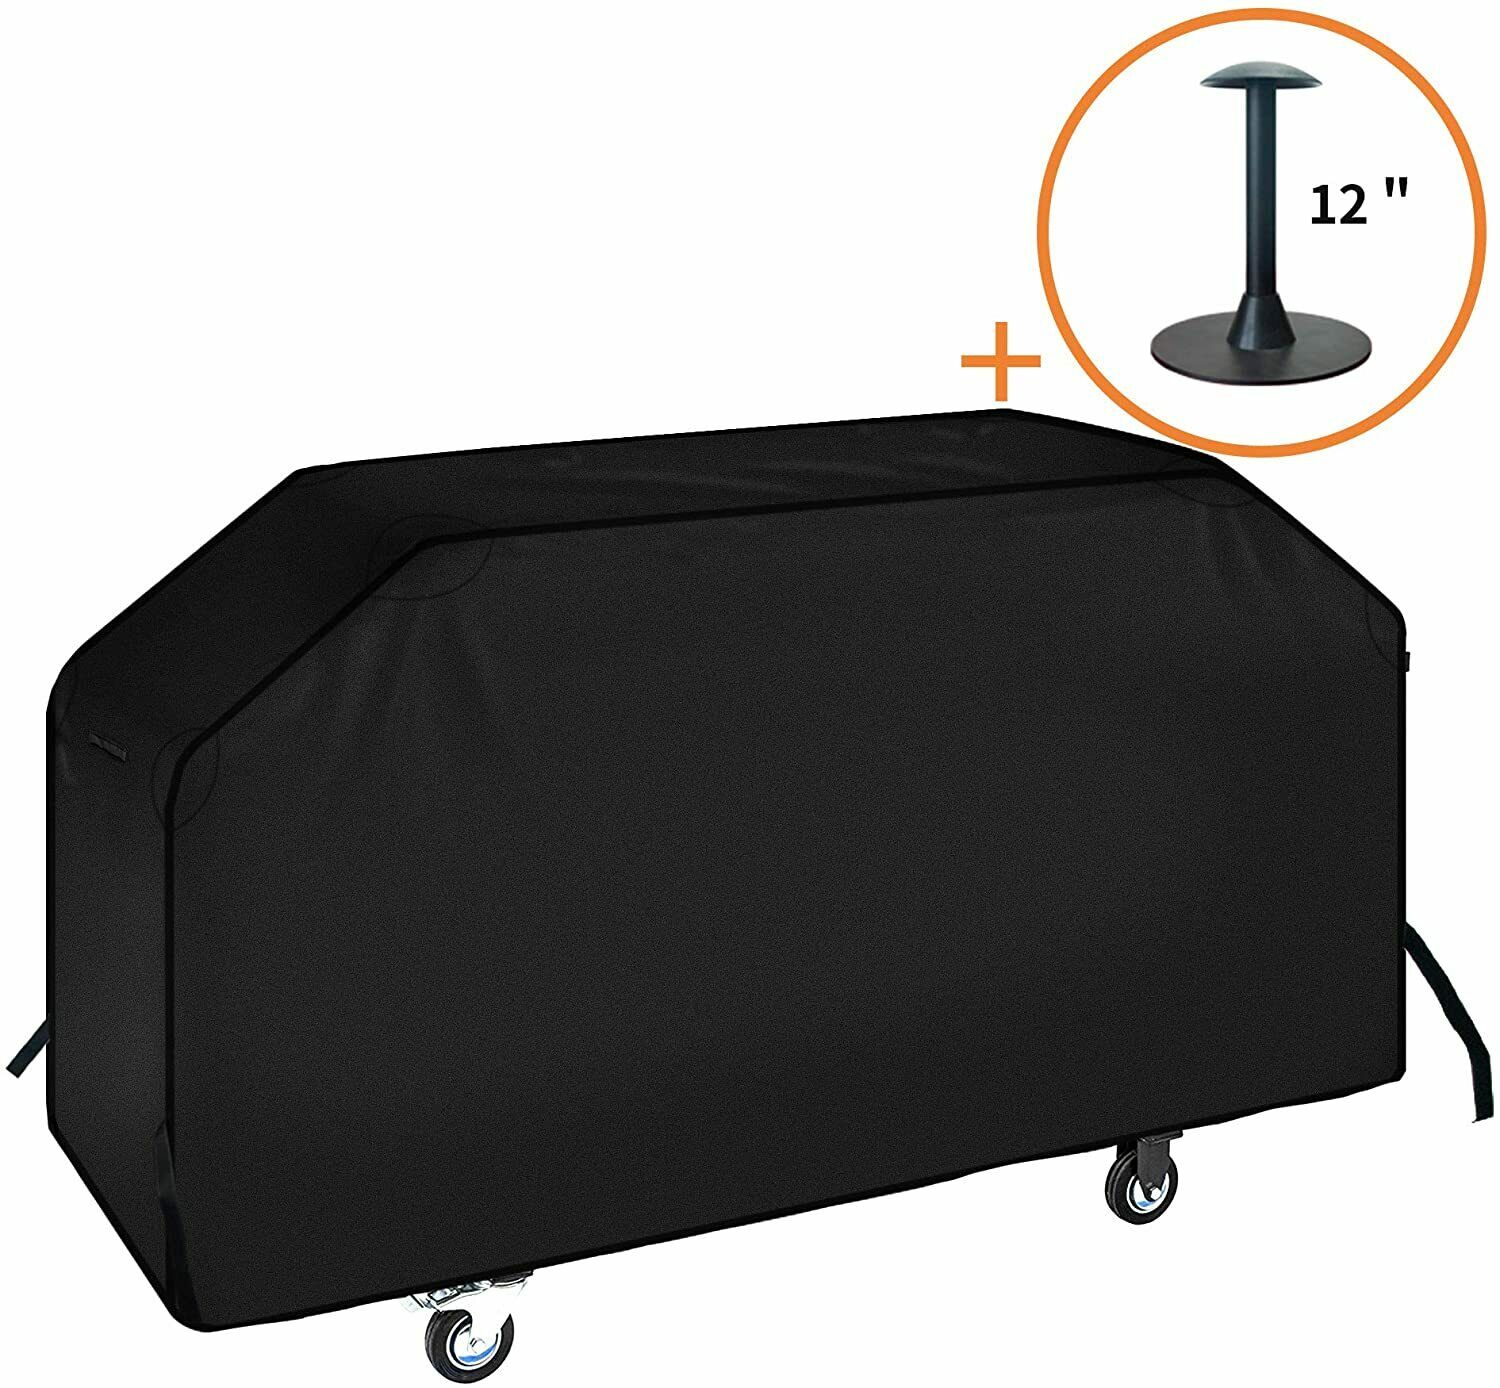 Icover 36 Inch Griddle Cover For Blackstone Griddle Station Incl Support Pole